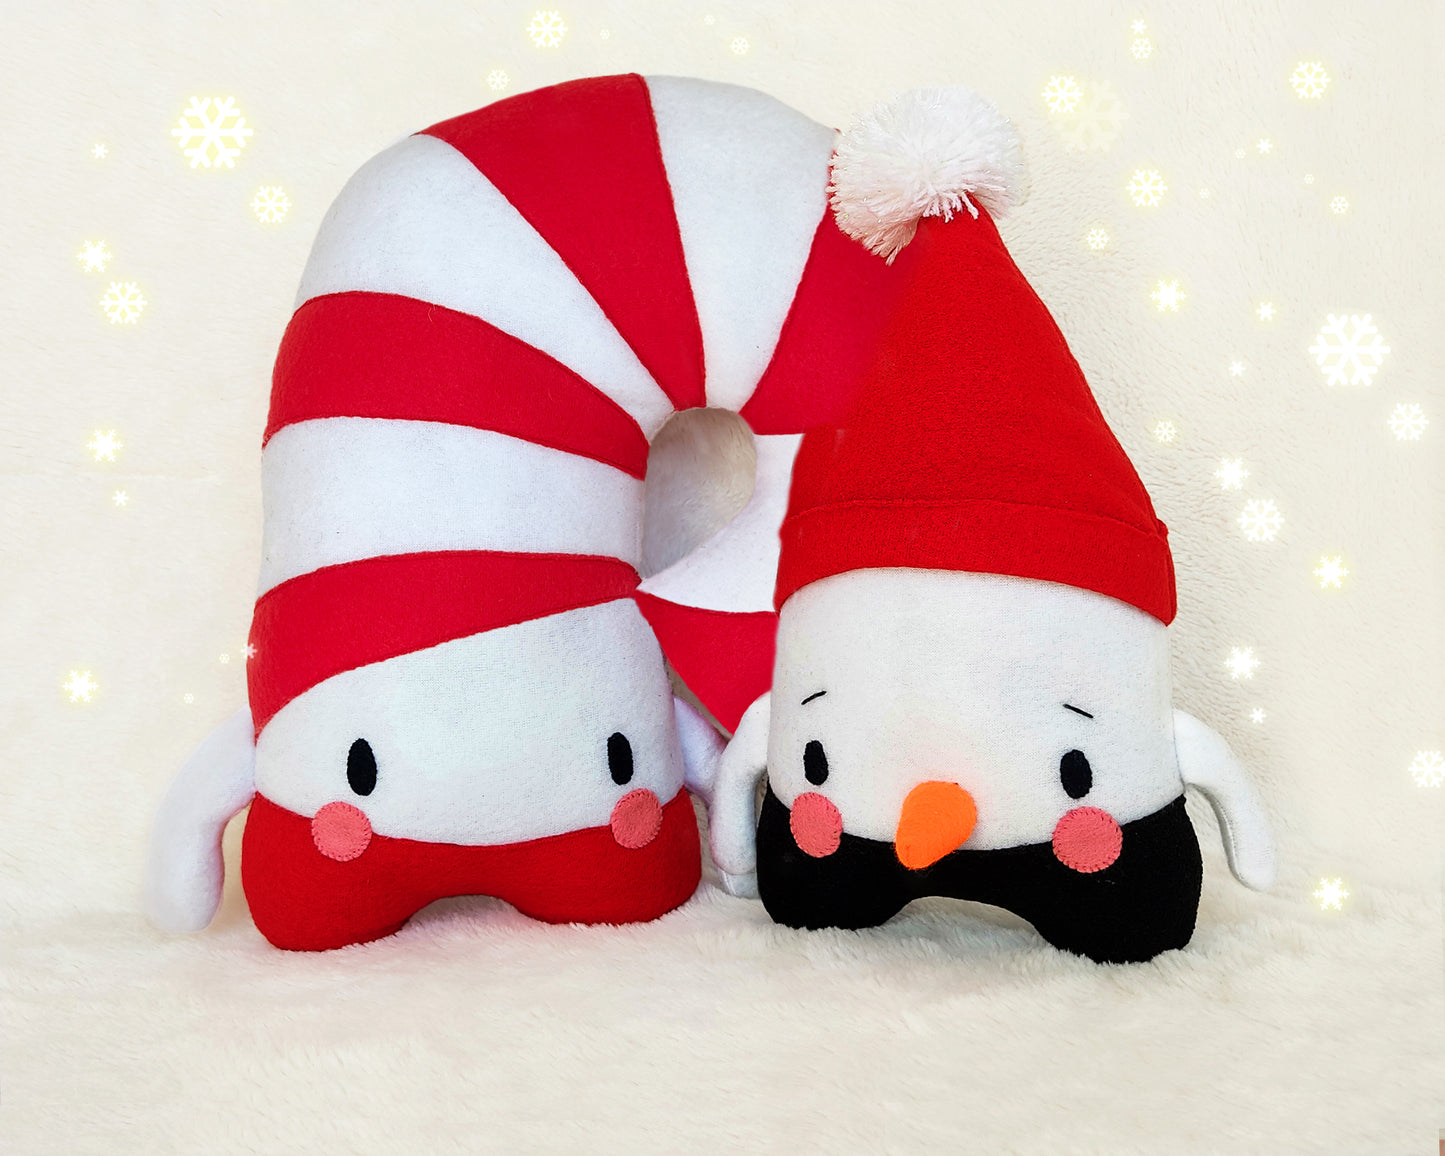 Christmas set of 2 patterns: Candy Stick Pillow and Snowman Toy - PDF toy sewing patterns and tutorials 